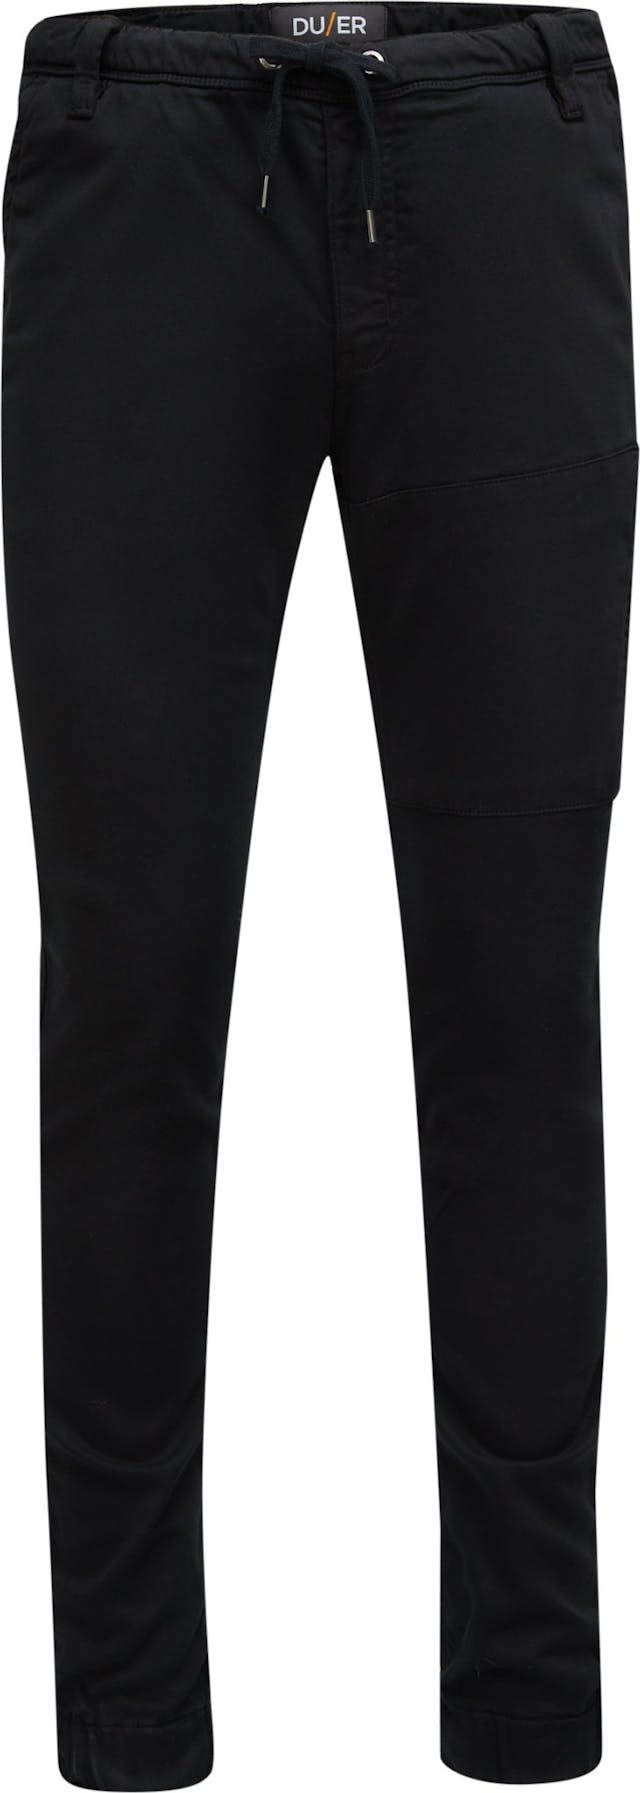 Product image for No Sweat Jogger - Men's